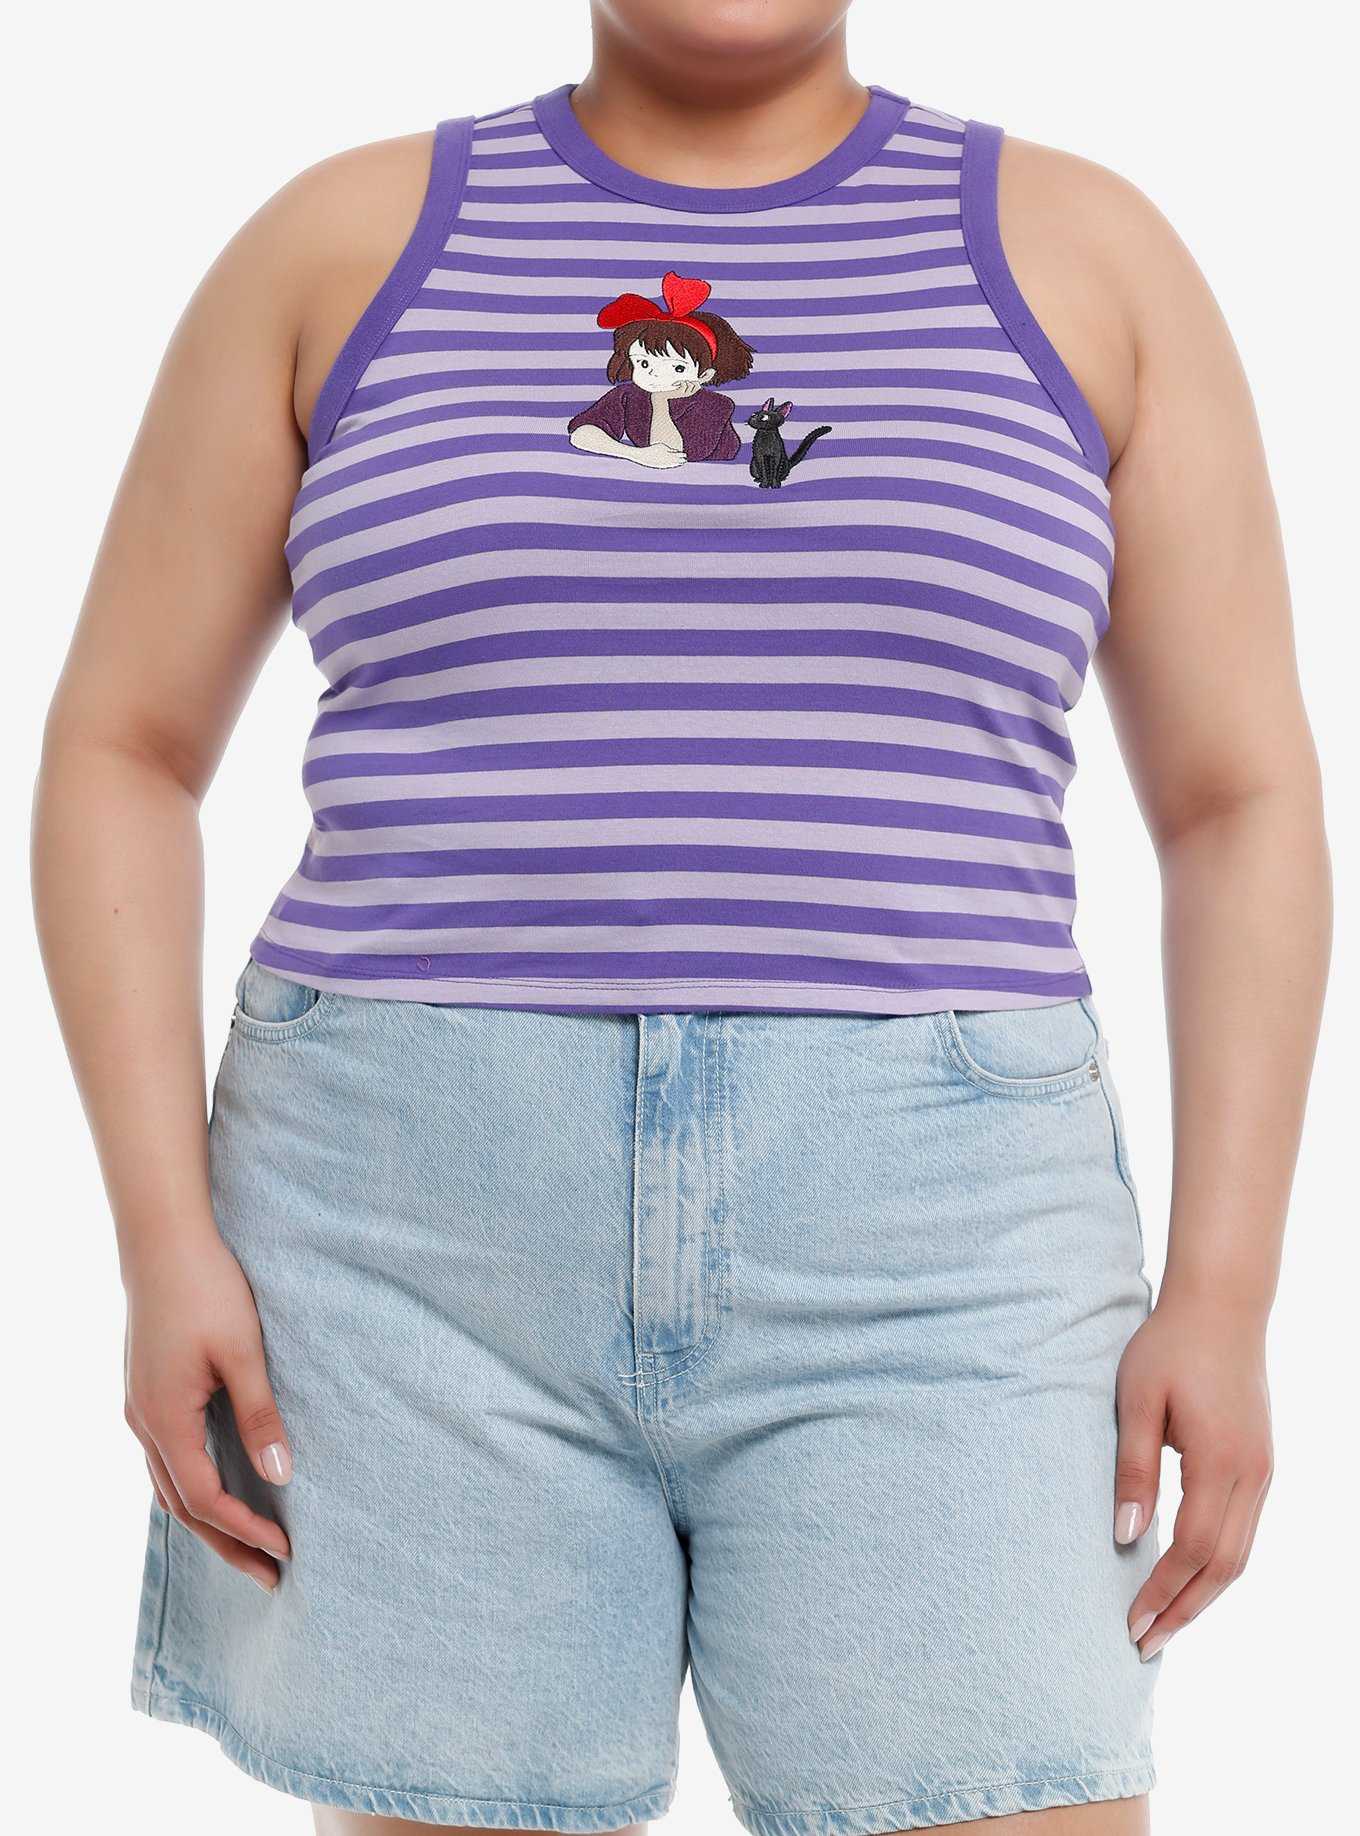 Studio Ghibli Kiki's Delivery Service Duo Embroidered Girls Tank Top Plus Size, , hi-res